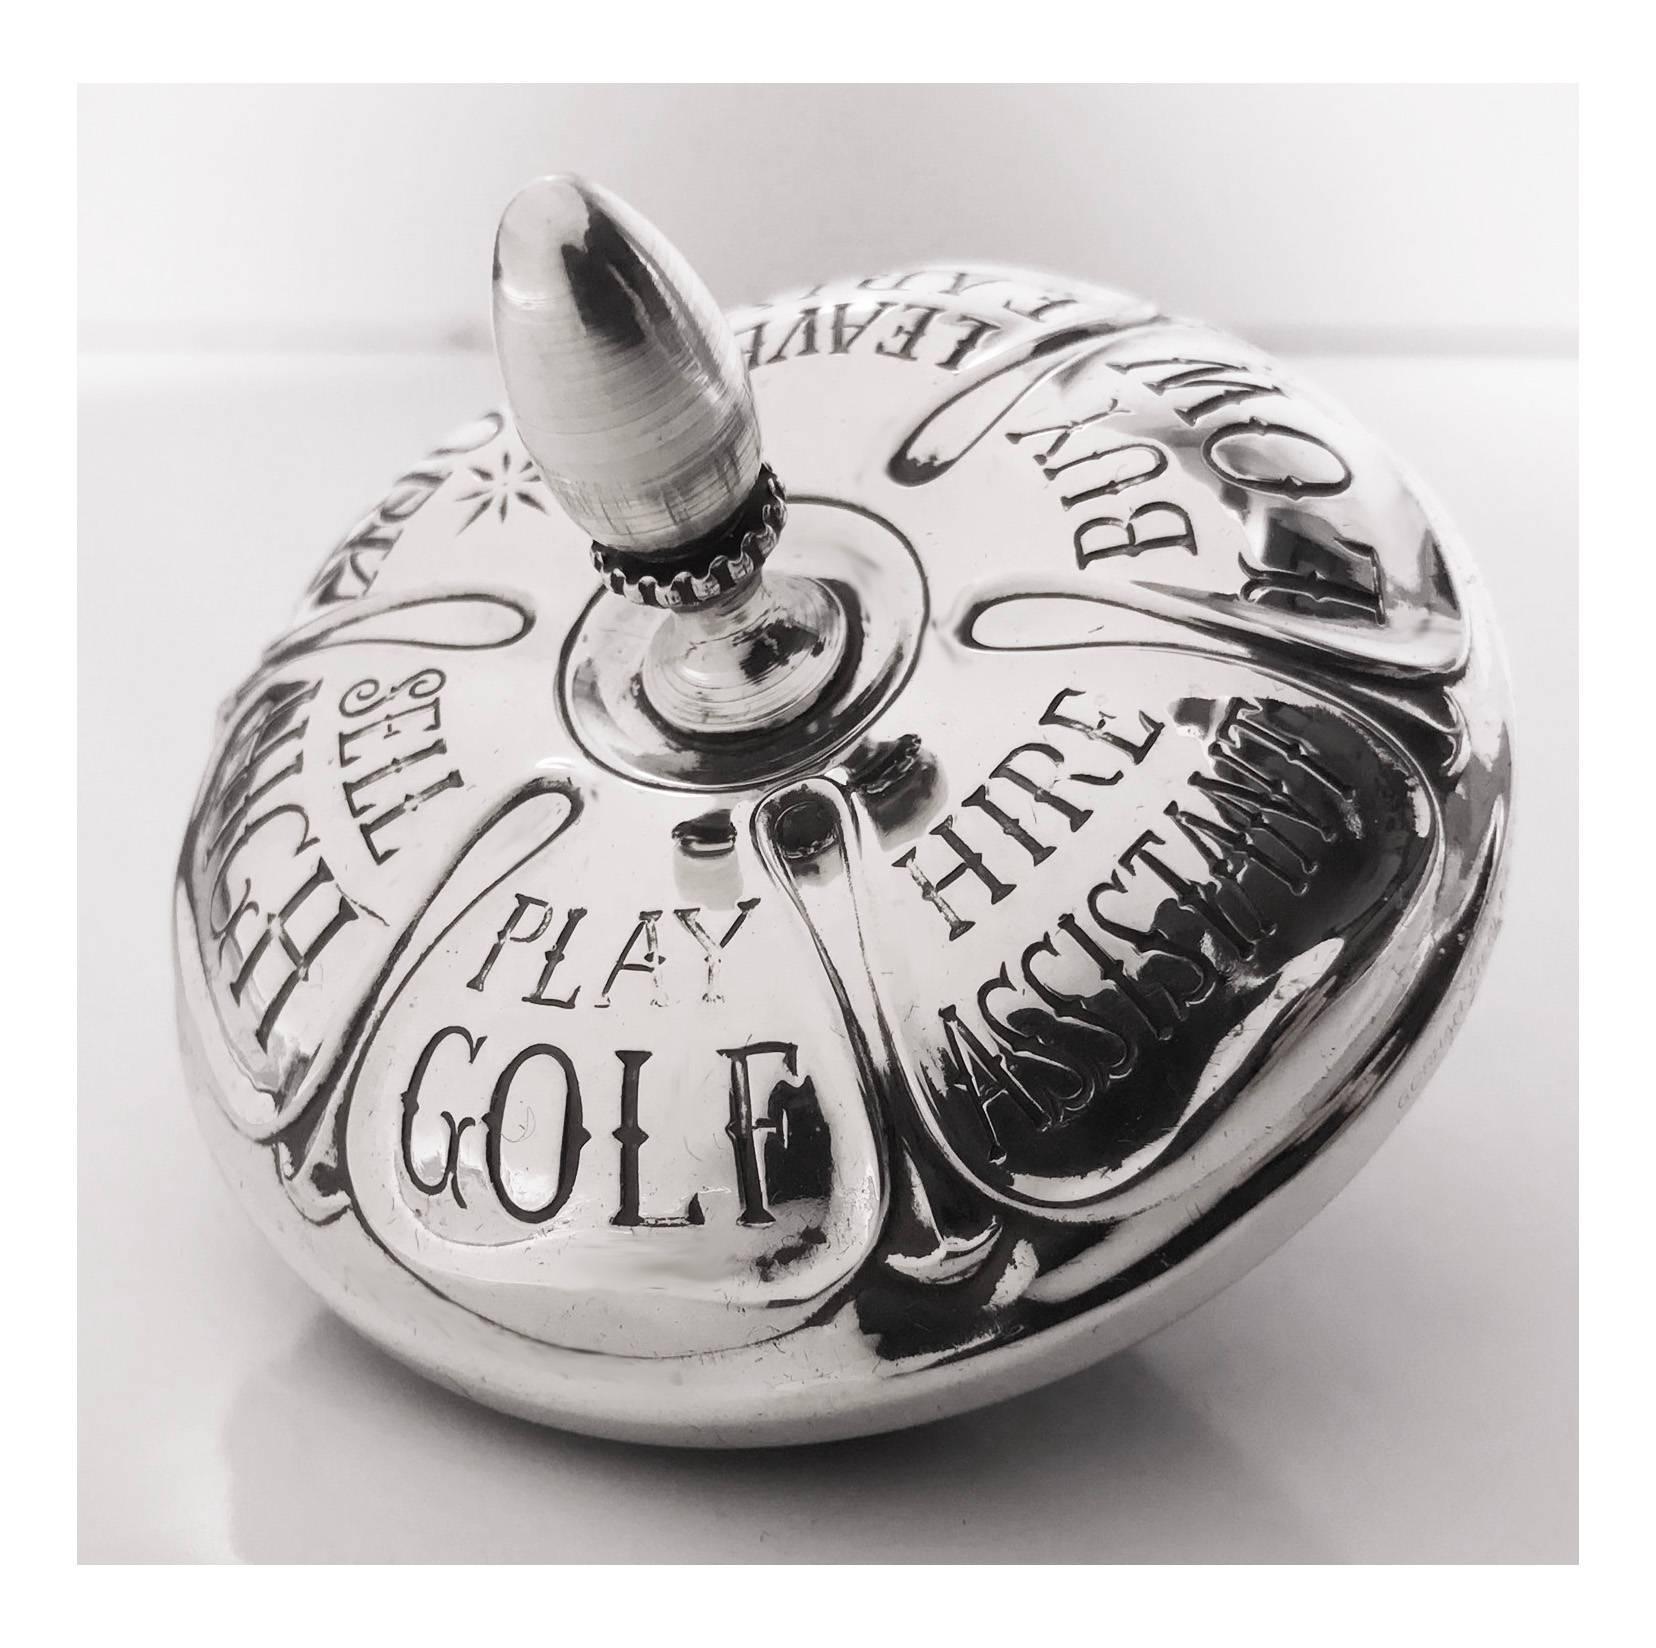 Gorham sterling executive decision making spinning top, circa 1940. The sterling silver top engraved with: Sell High - Play Golf - Hire Assistant - Buy Low - Leave Early - Work. Dimensions: 2 3/4 inches, diameter by 2 3/4 inches high. Ebony base.